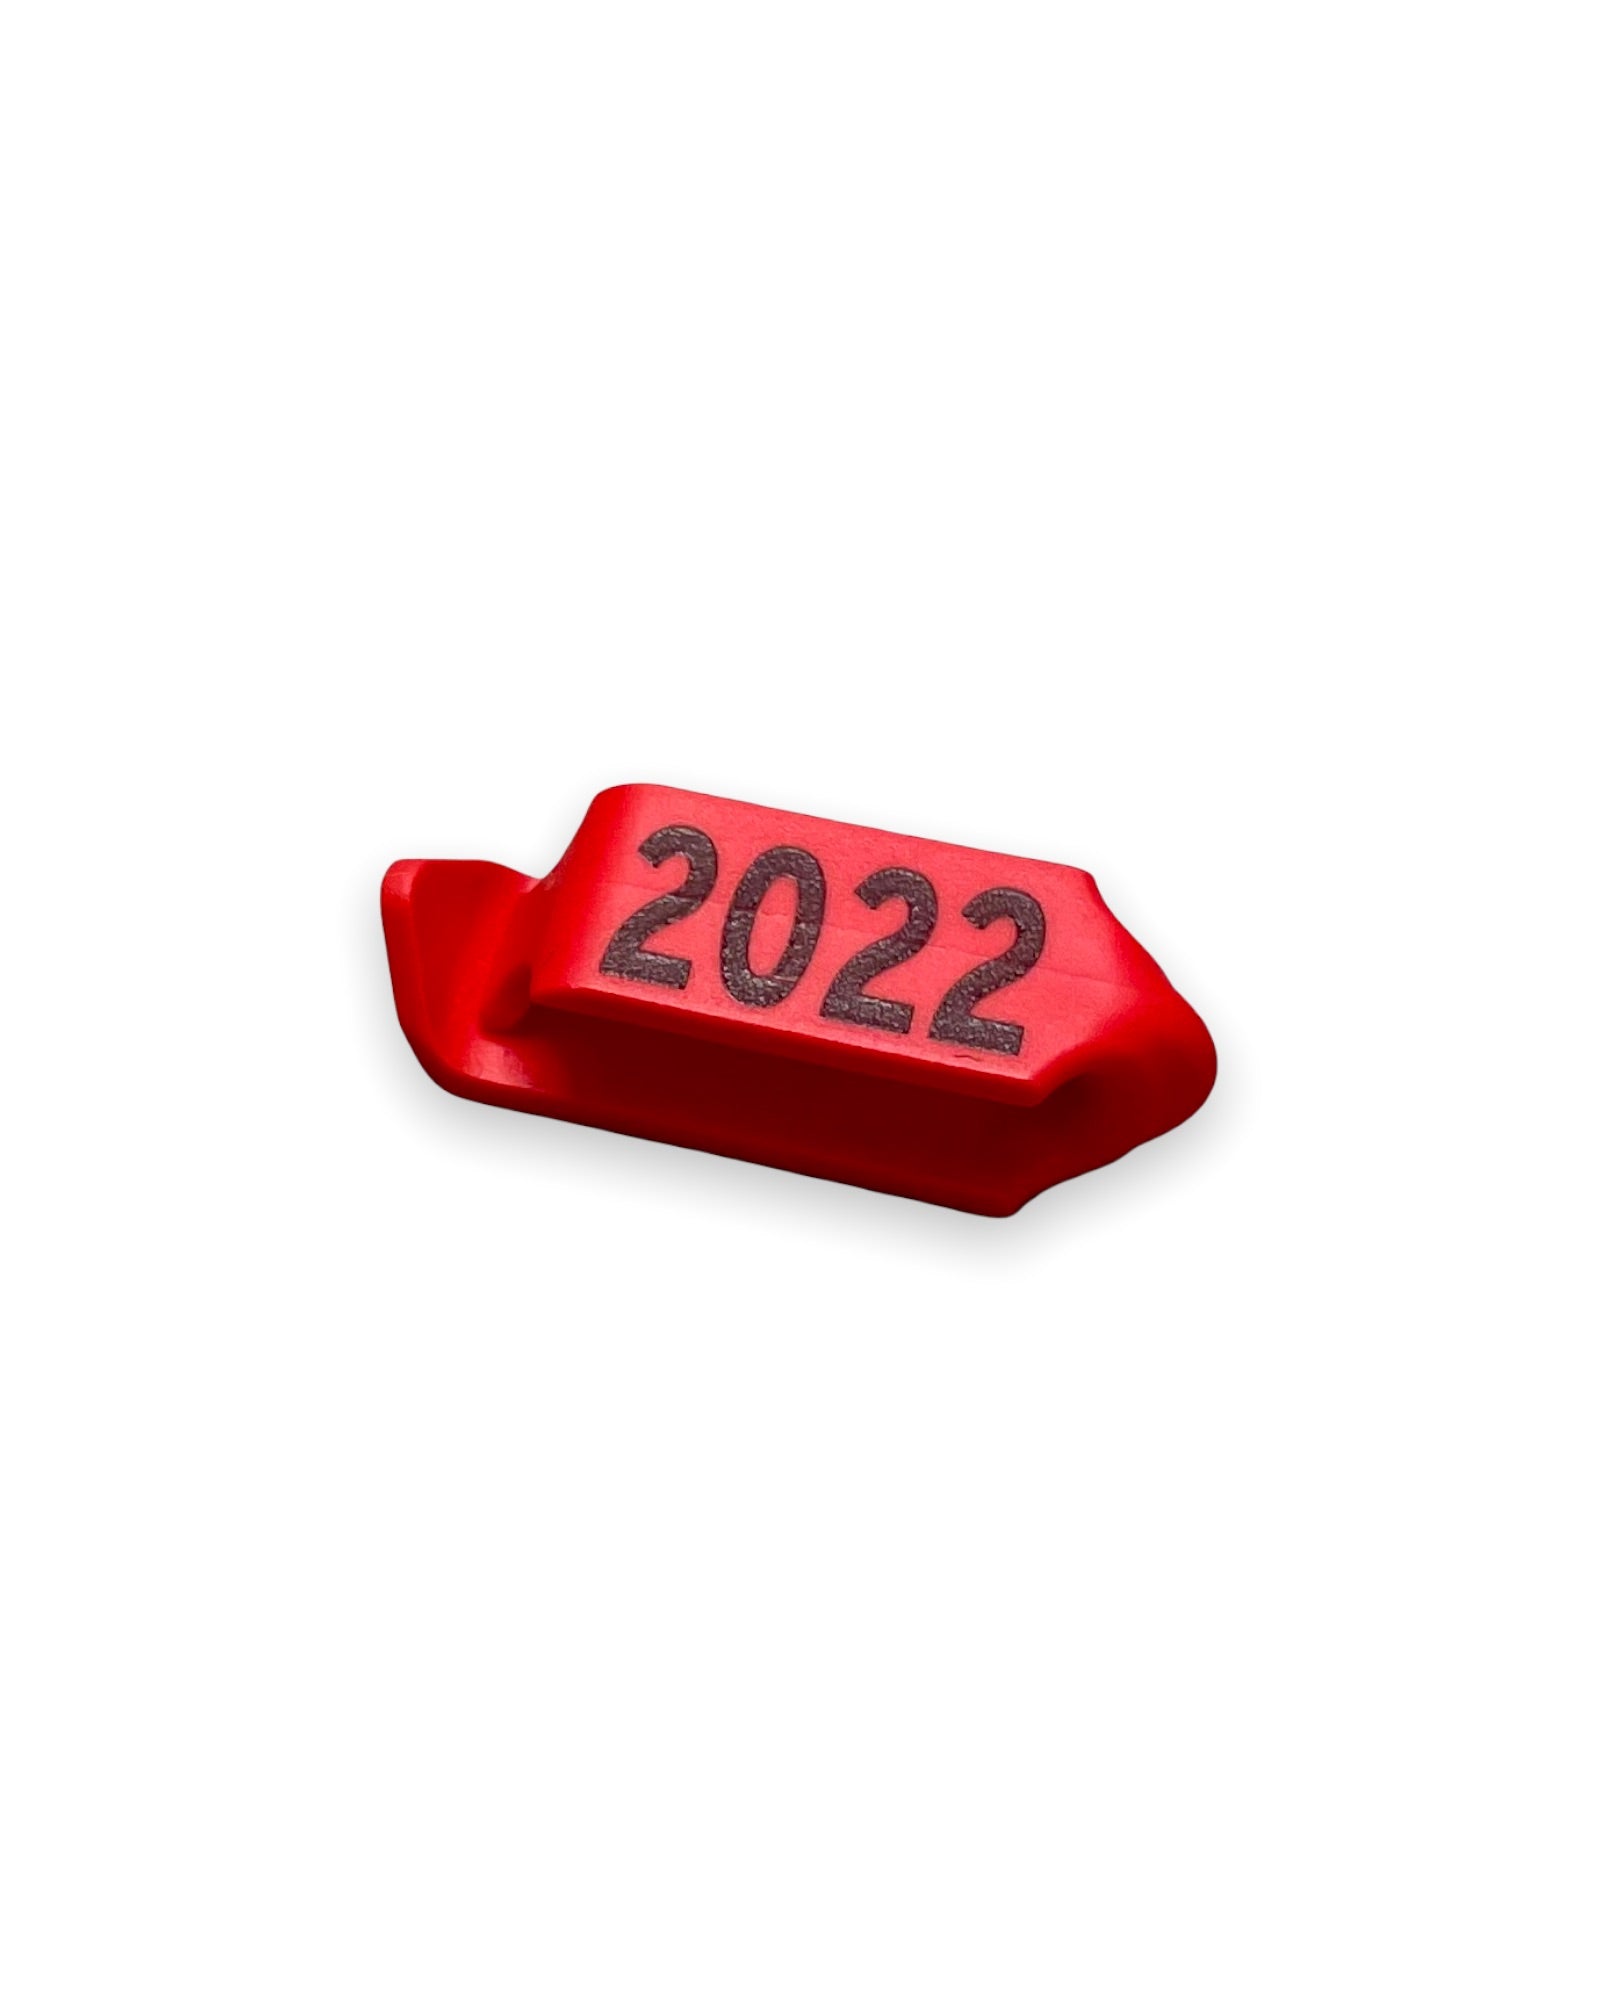 Sheep Tag | BK8 Outfitters | 2022 Red